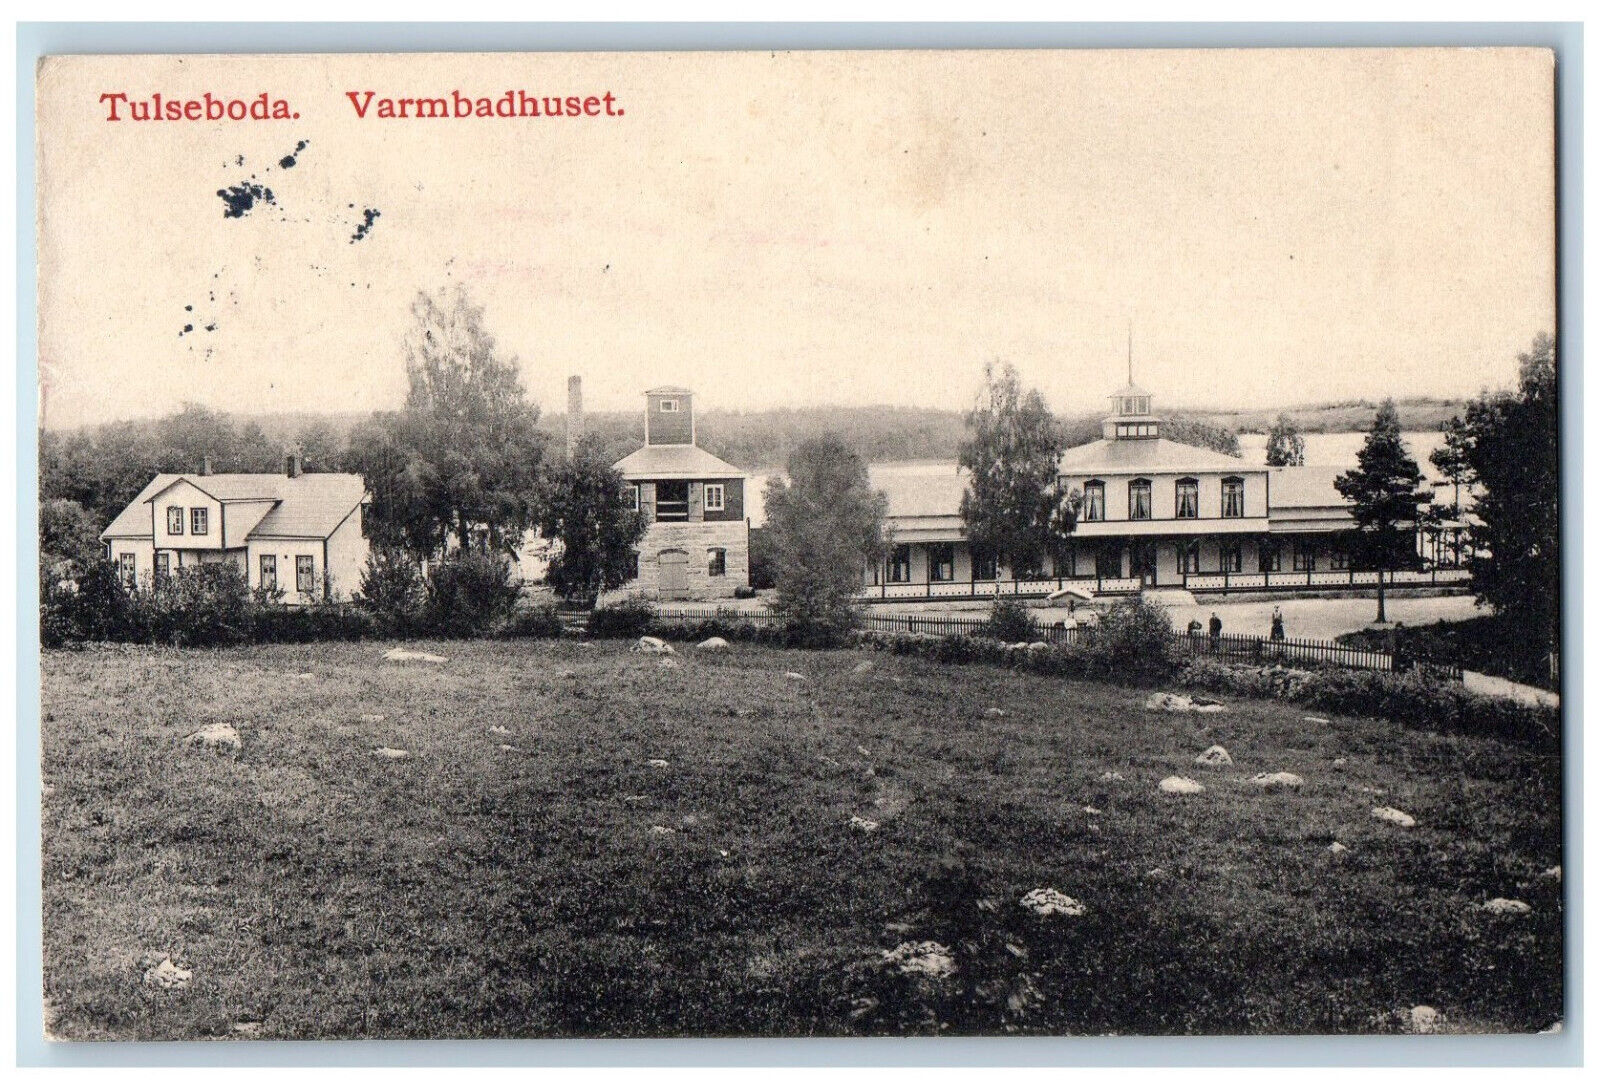 Tulseboda Sweden Postcard The Thermal Bath House 1909 Antique Posted